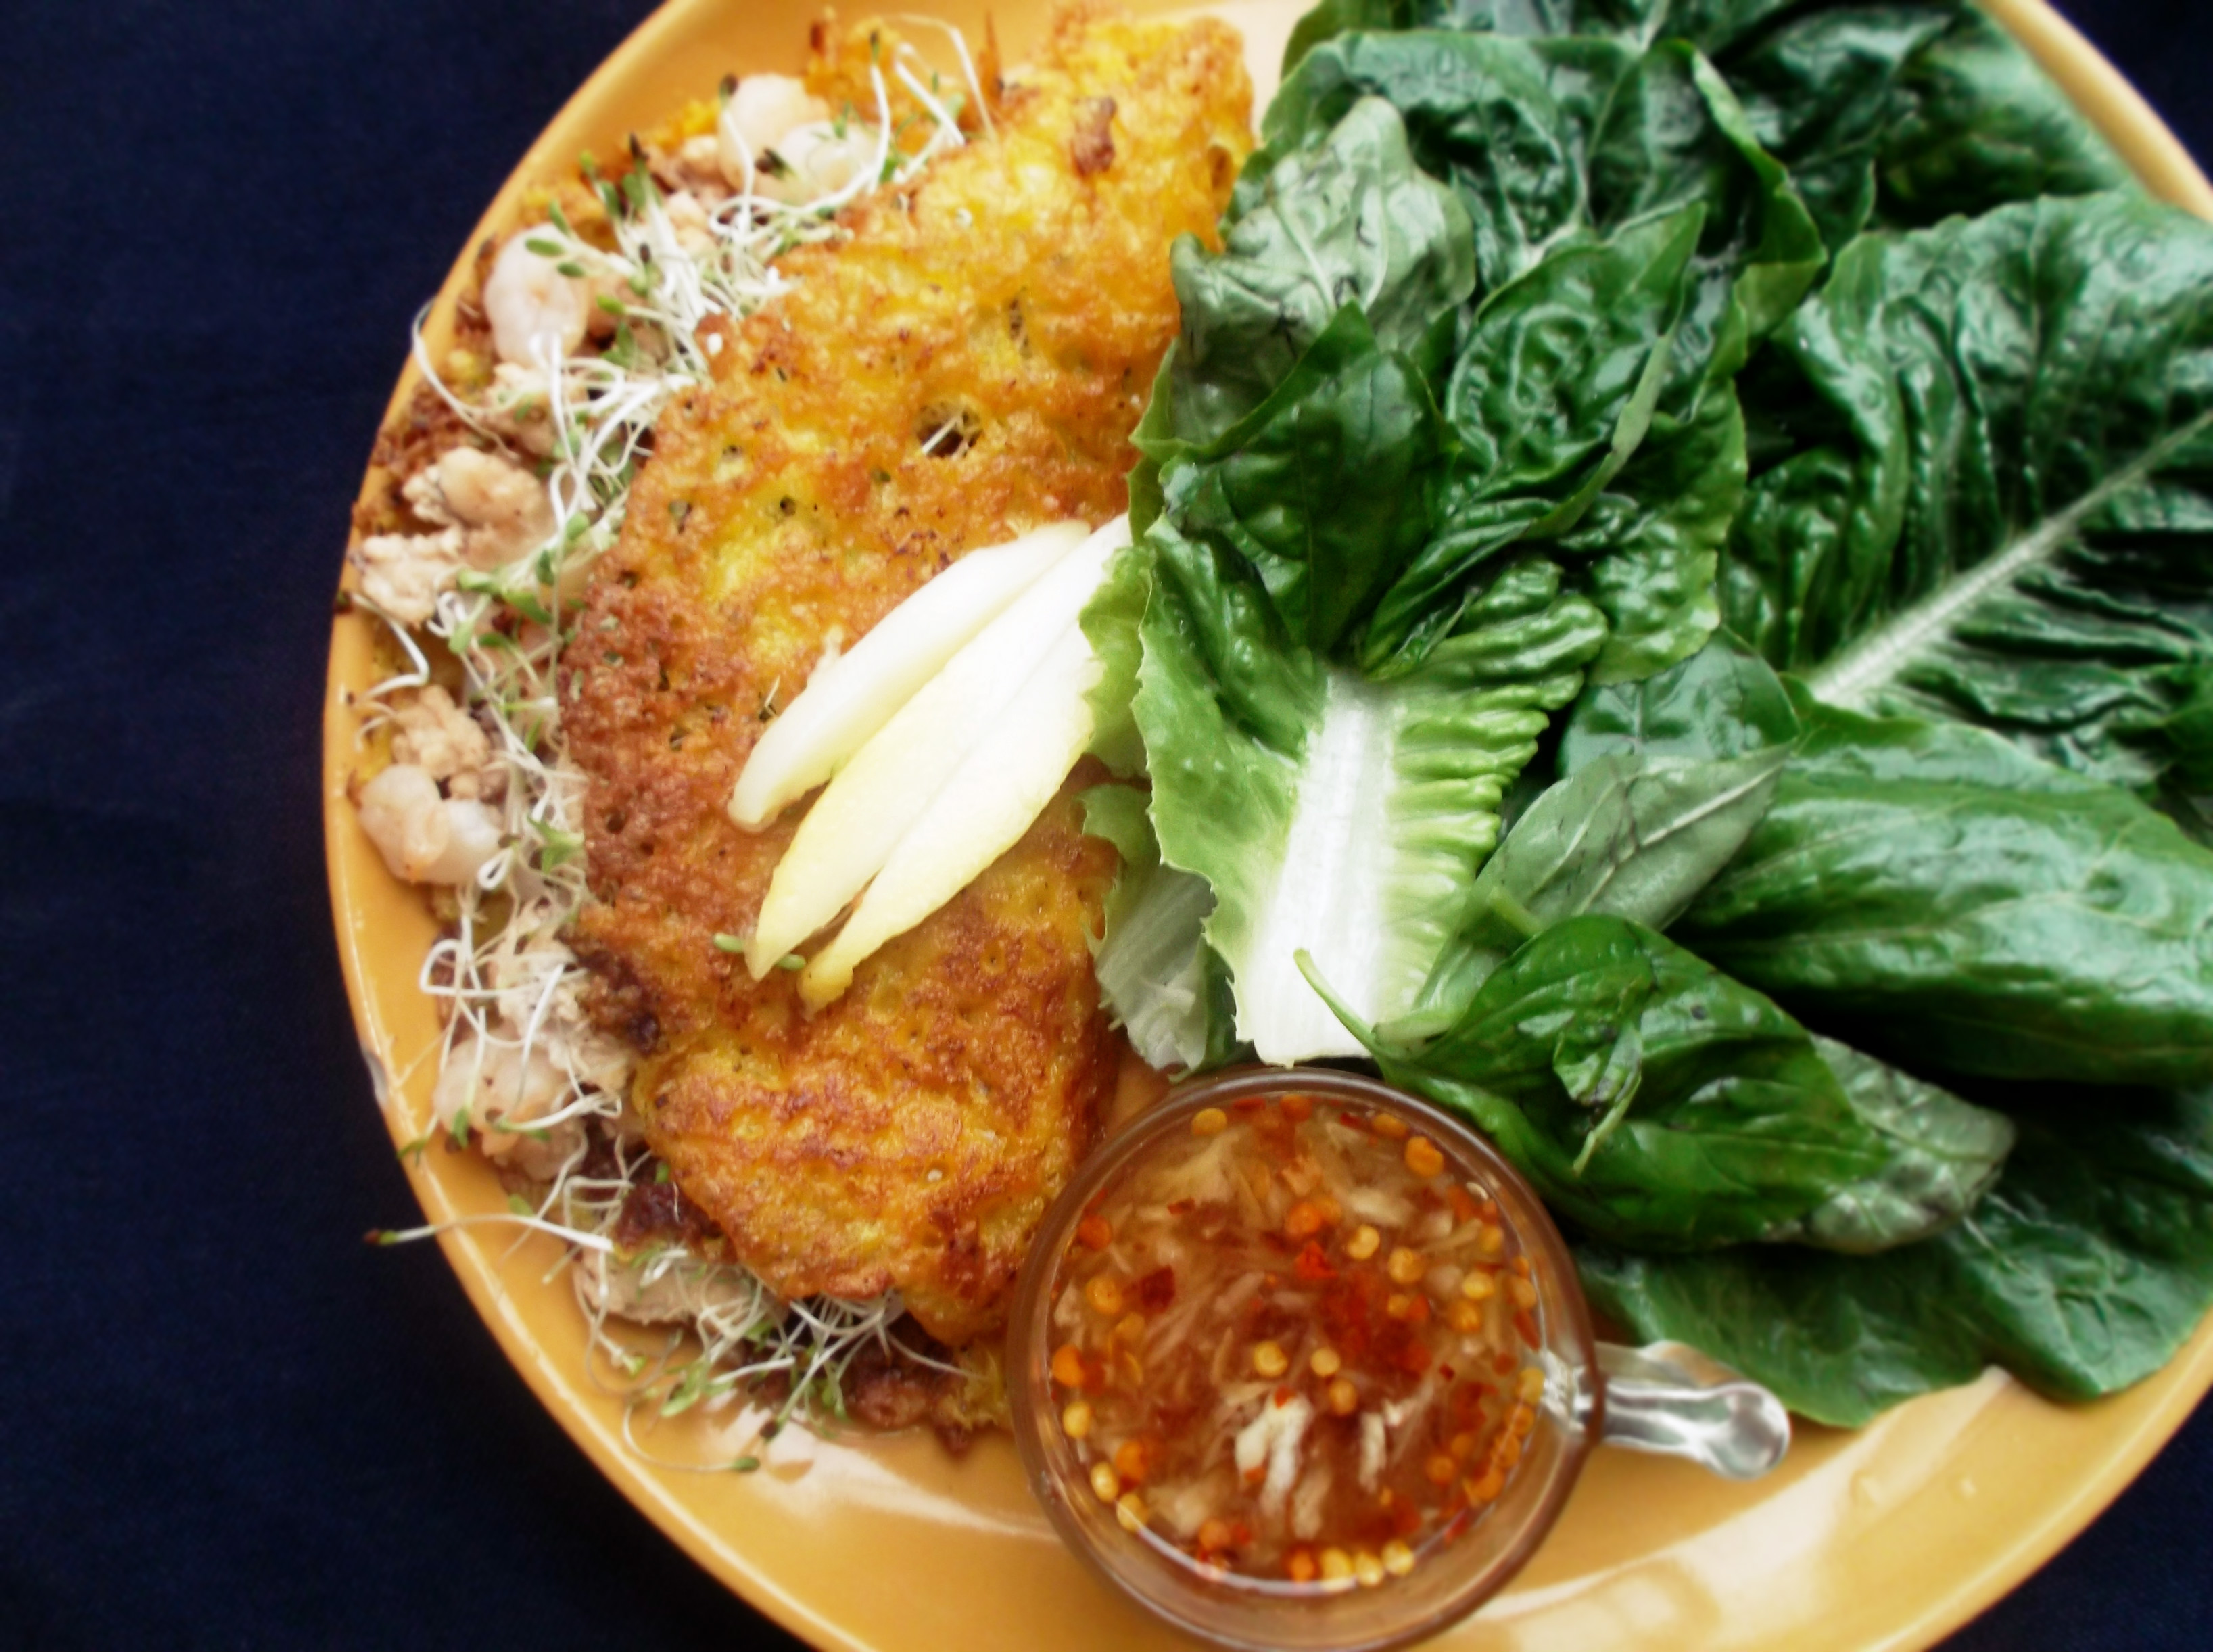 Banh Xeo Recipe (Crispy Coconut Crepes with Nuoc Mam Cham Dipping Sauce)